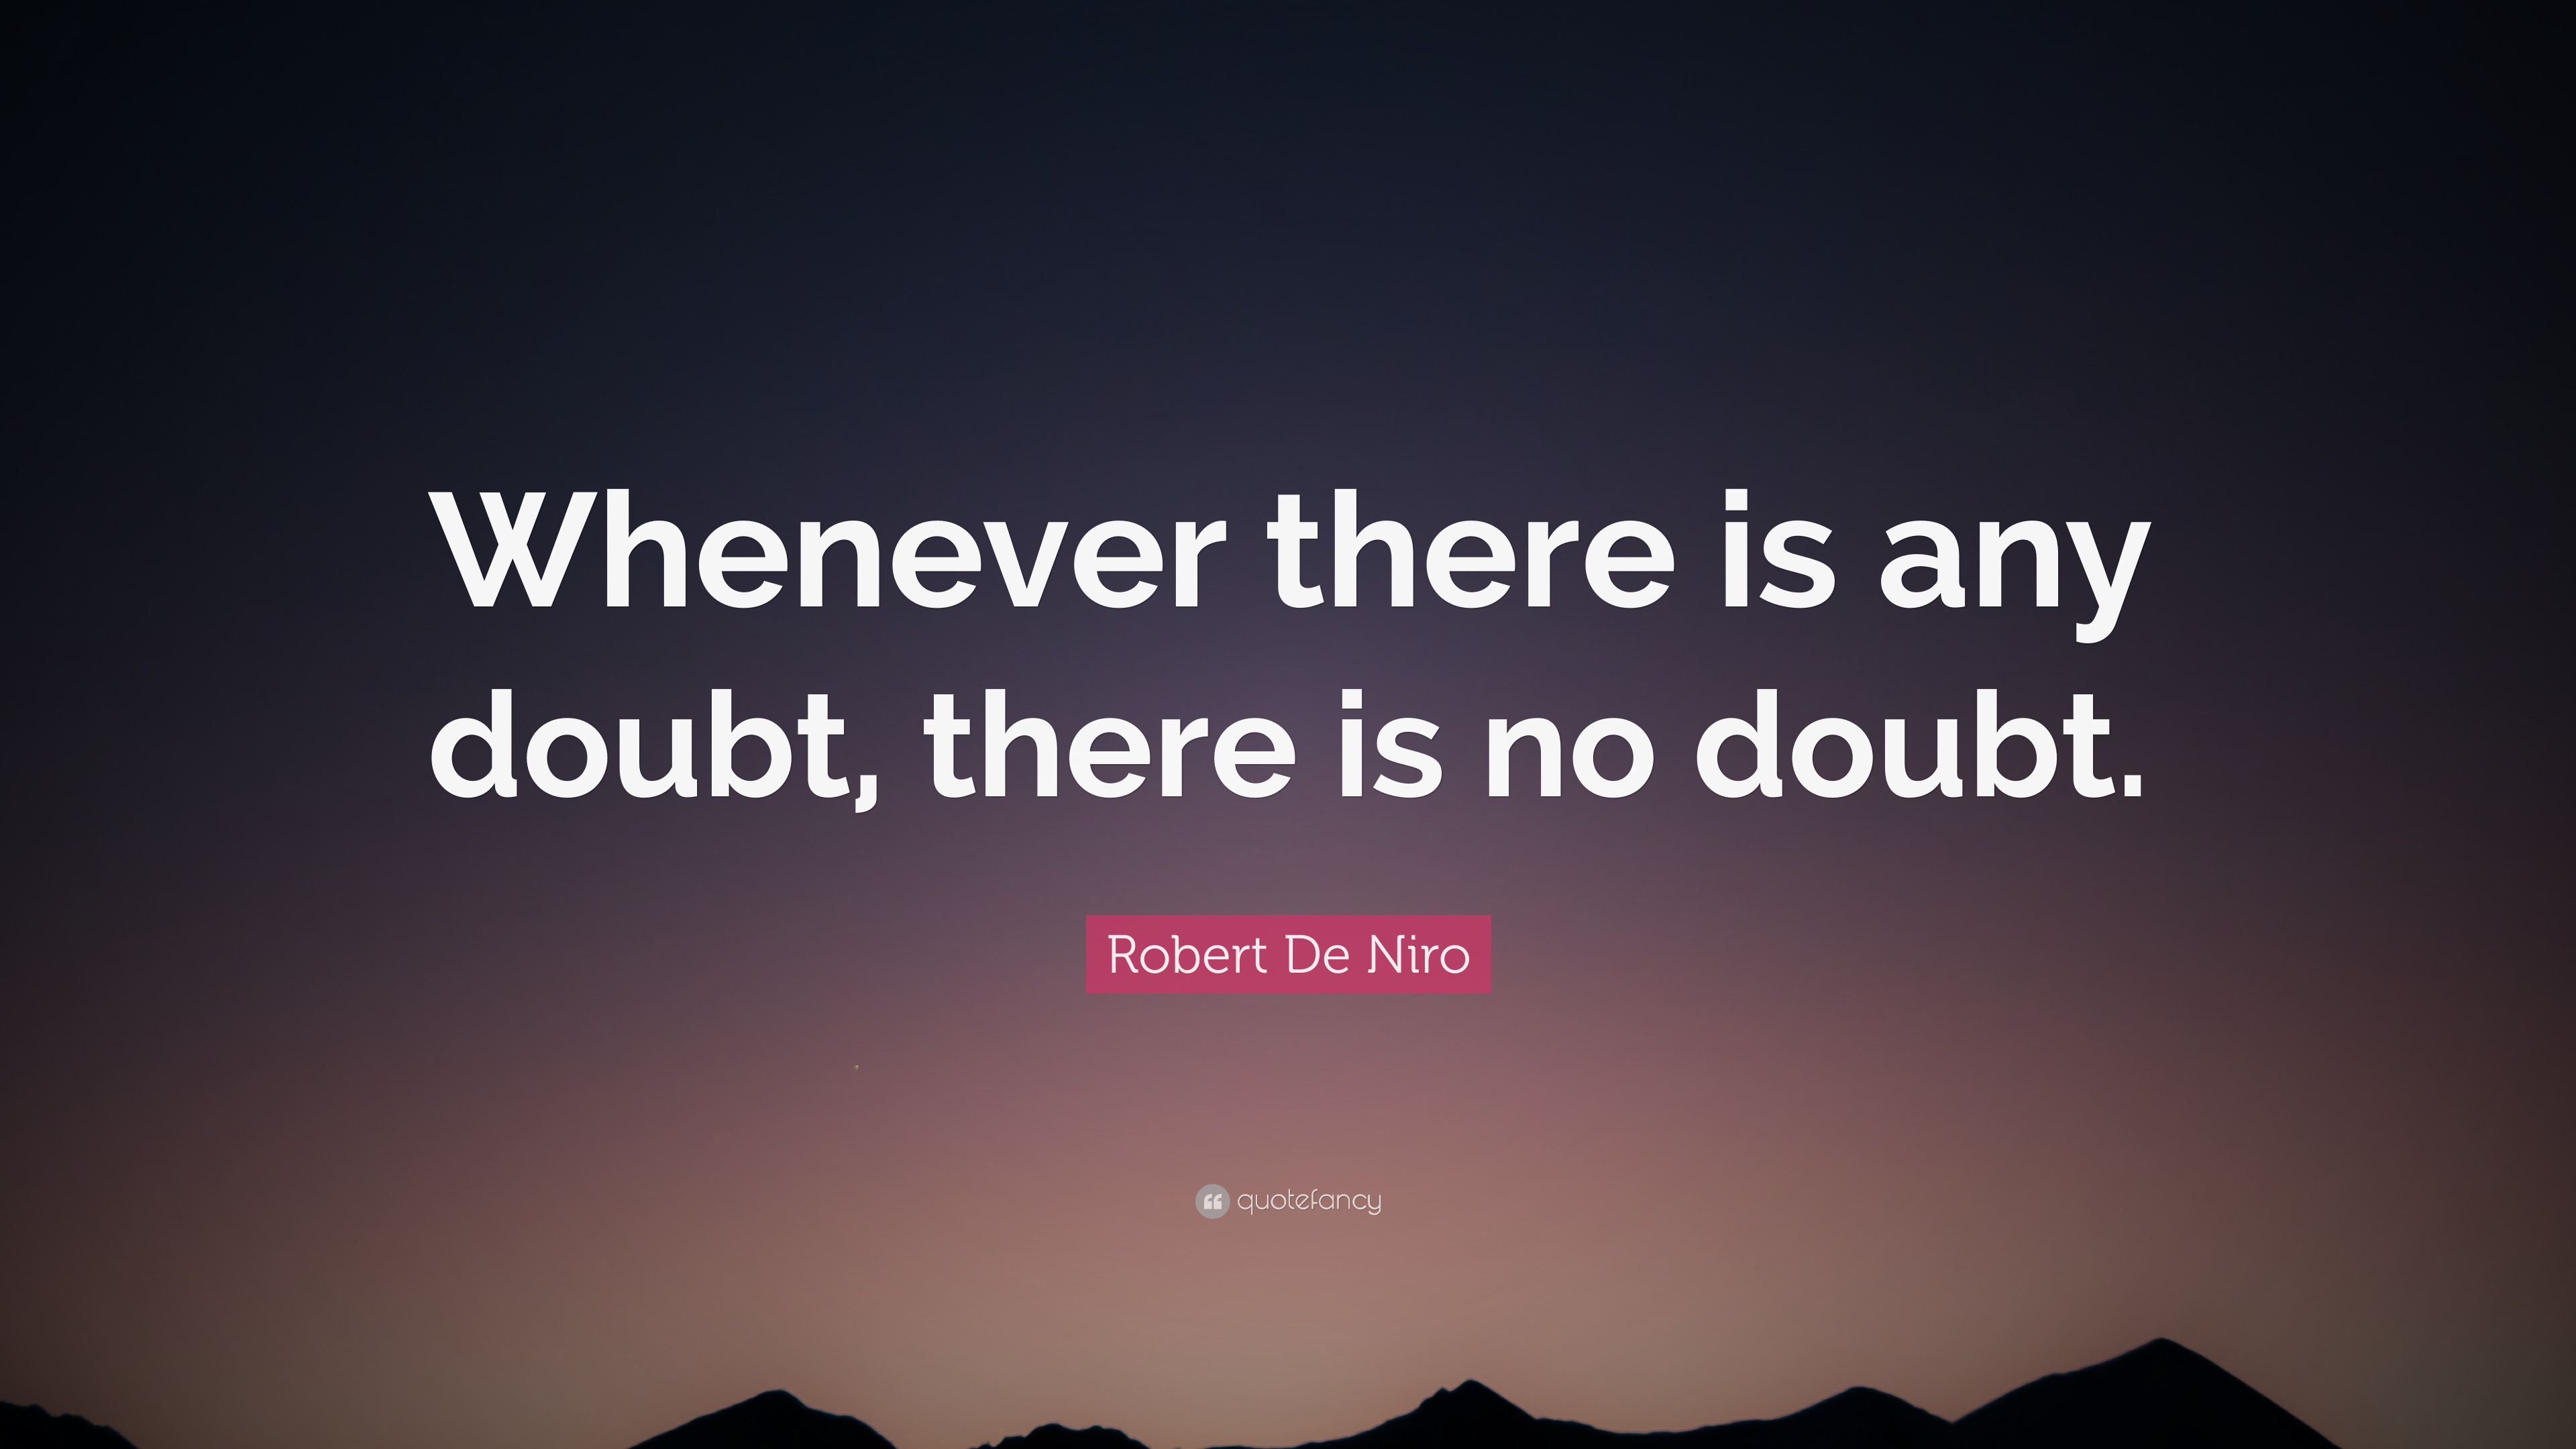 2251433-Robert-De-Niro-Quote-Whenever-there-is-any-doubt-there-is-no-doubt.jpg